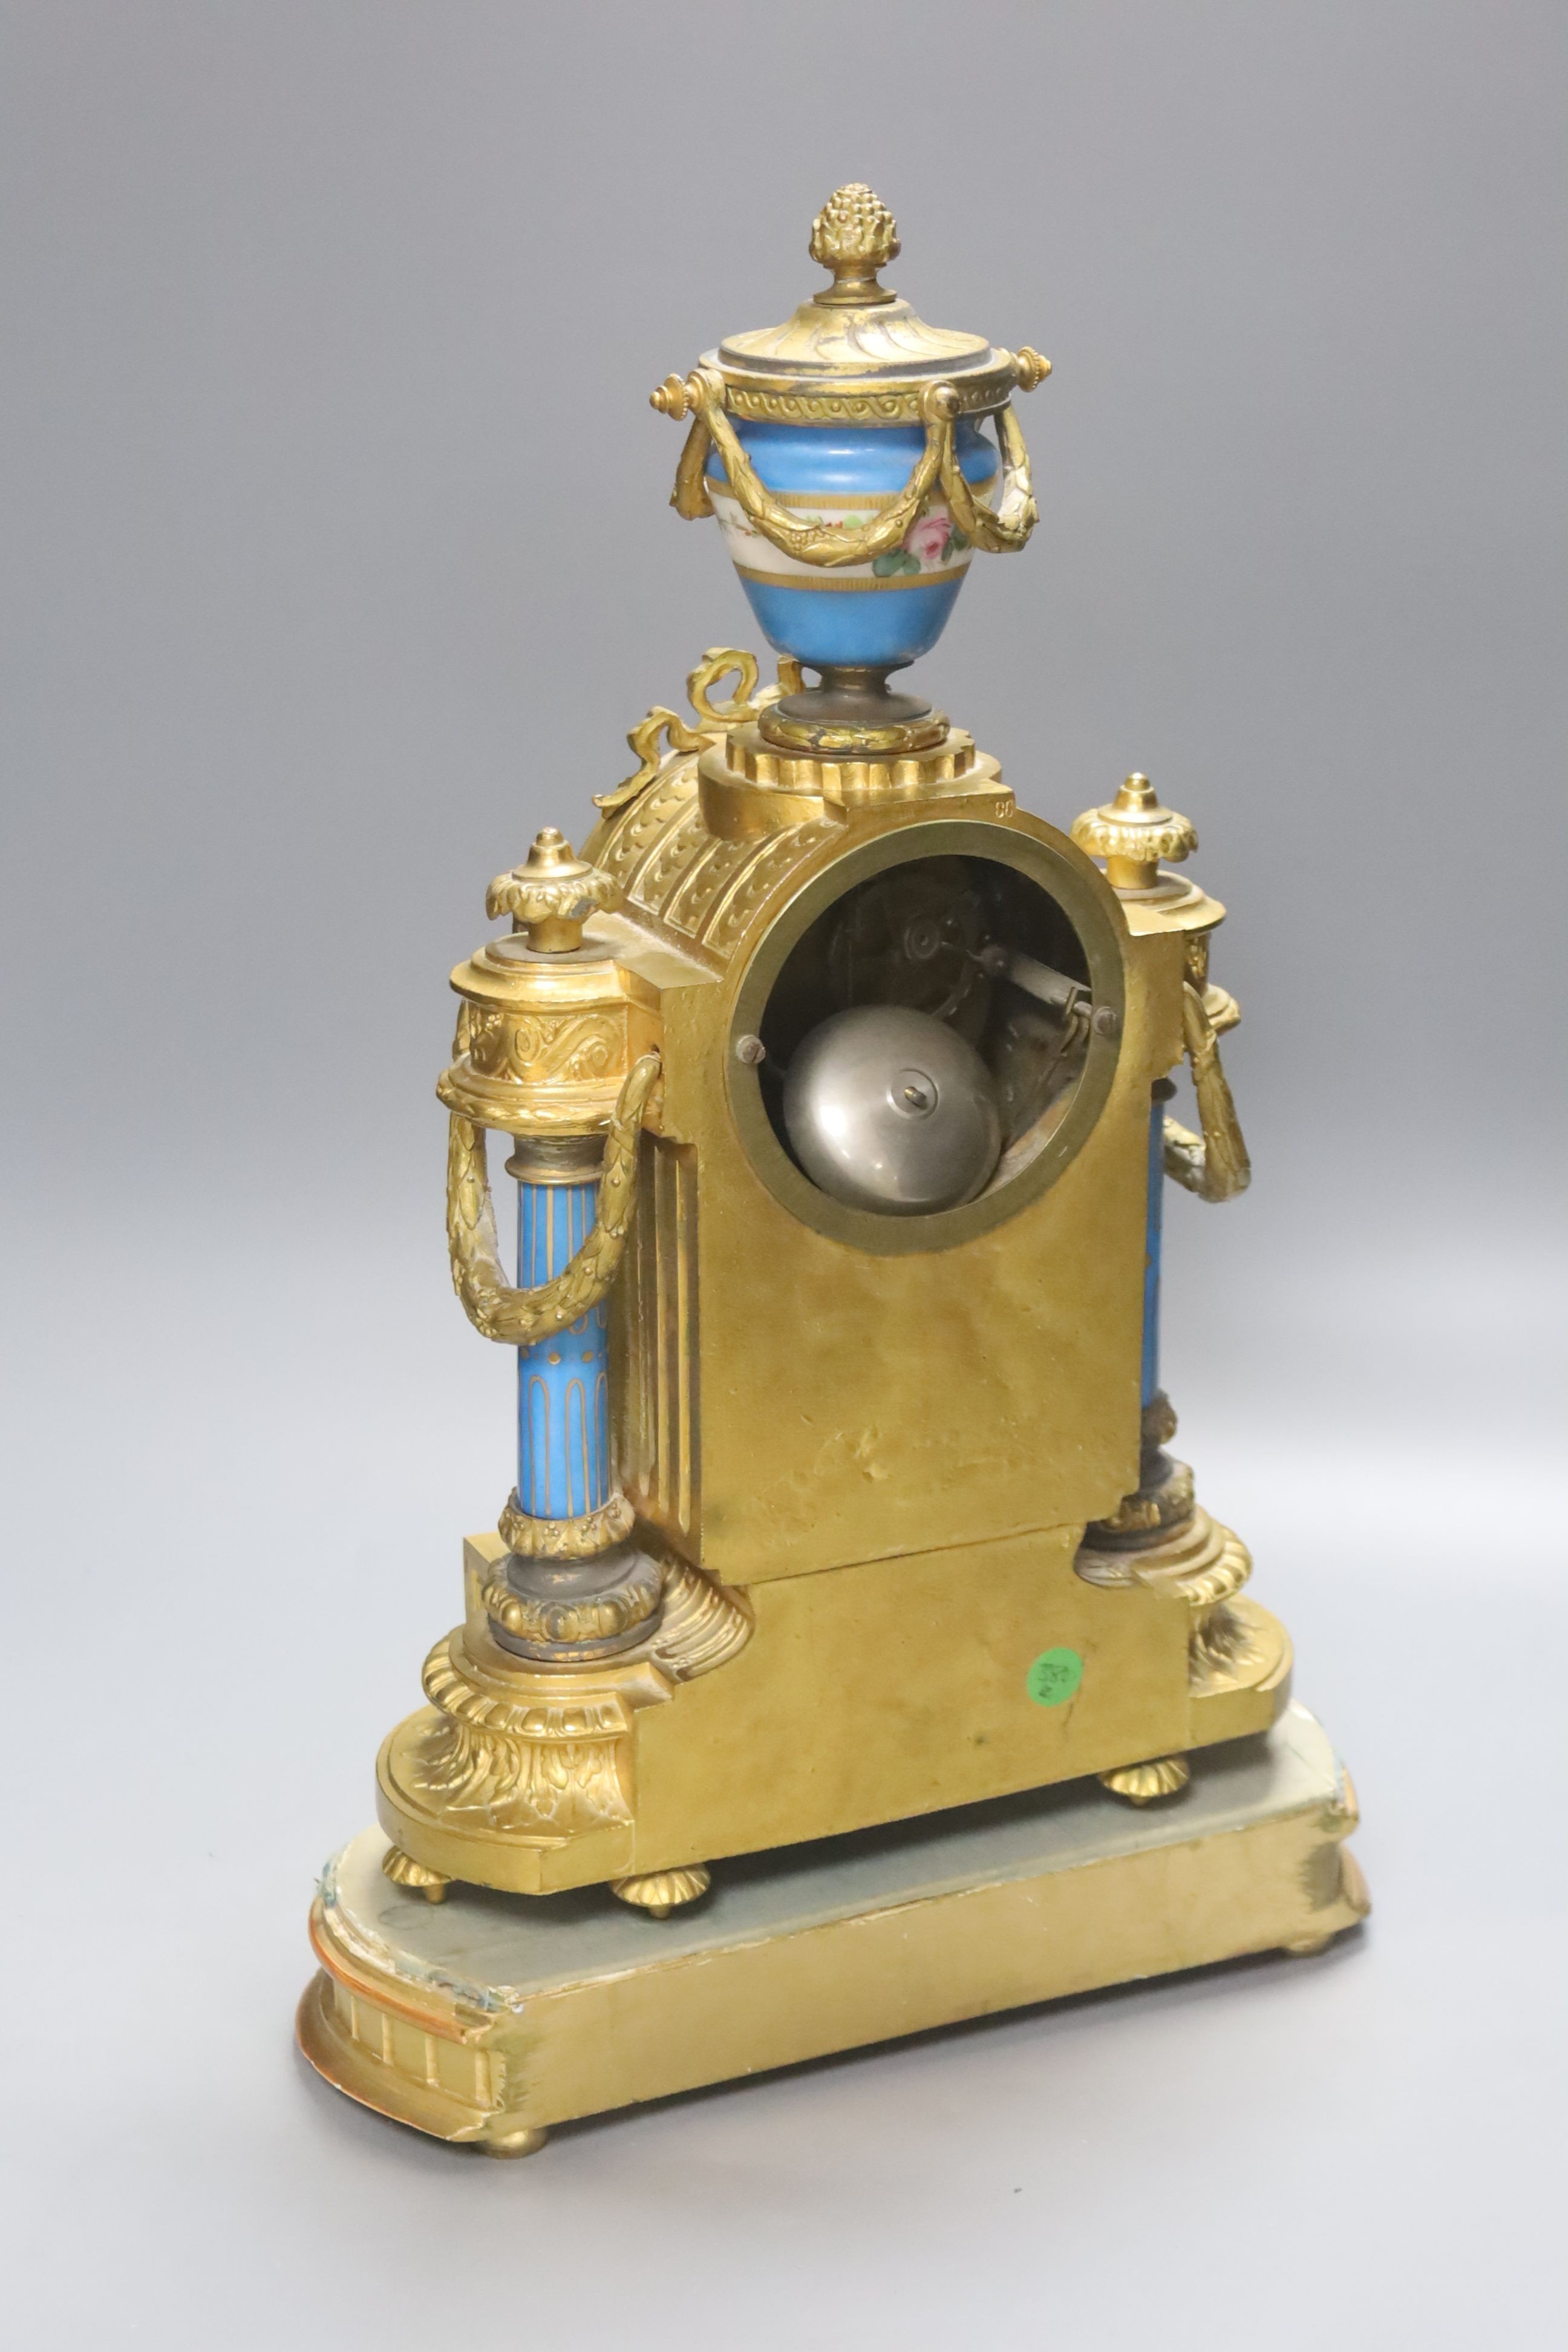 A late 19th century French gilt metal and porcelain mounted mantel clock, Japy freres movement countwheel striking on a bell, on plinth, height 44cm